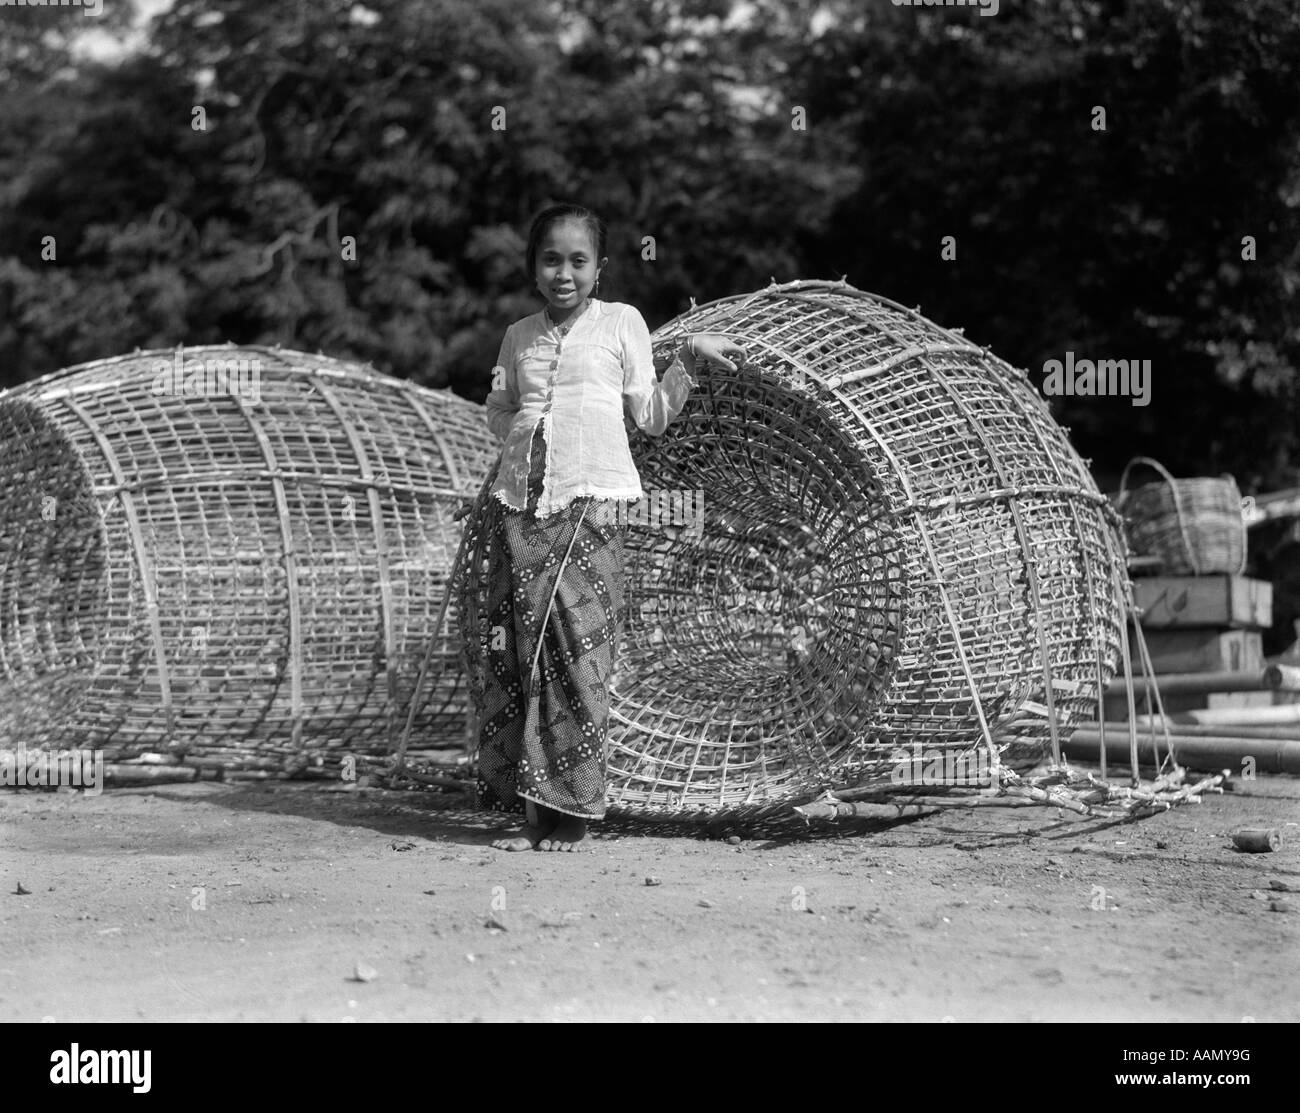 Trap baskets Black and White Stock Photos & Images - Alamy